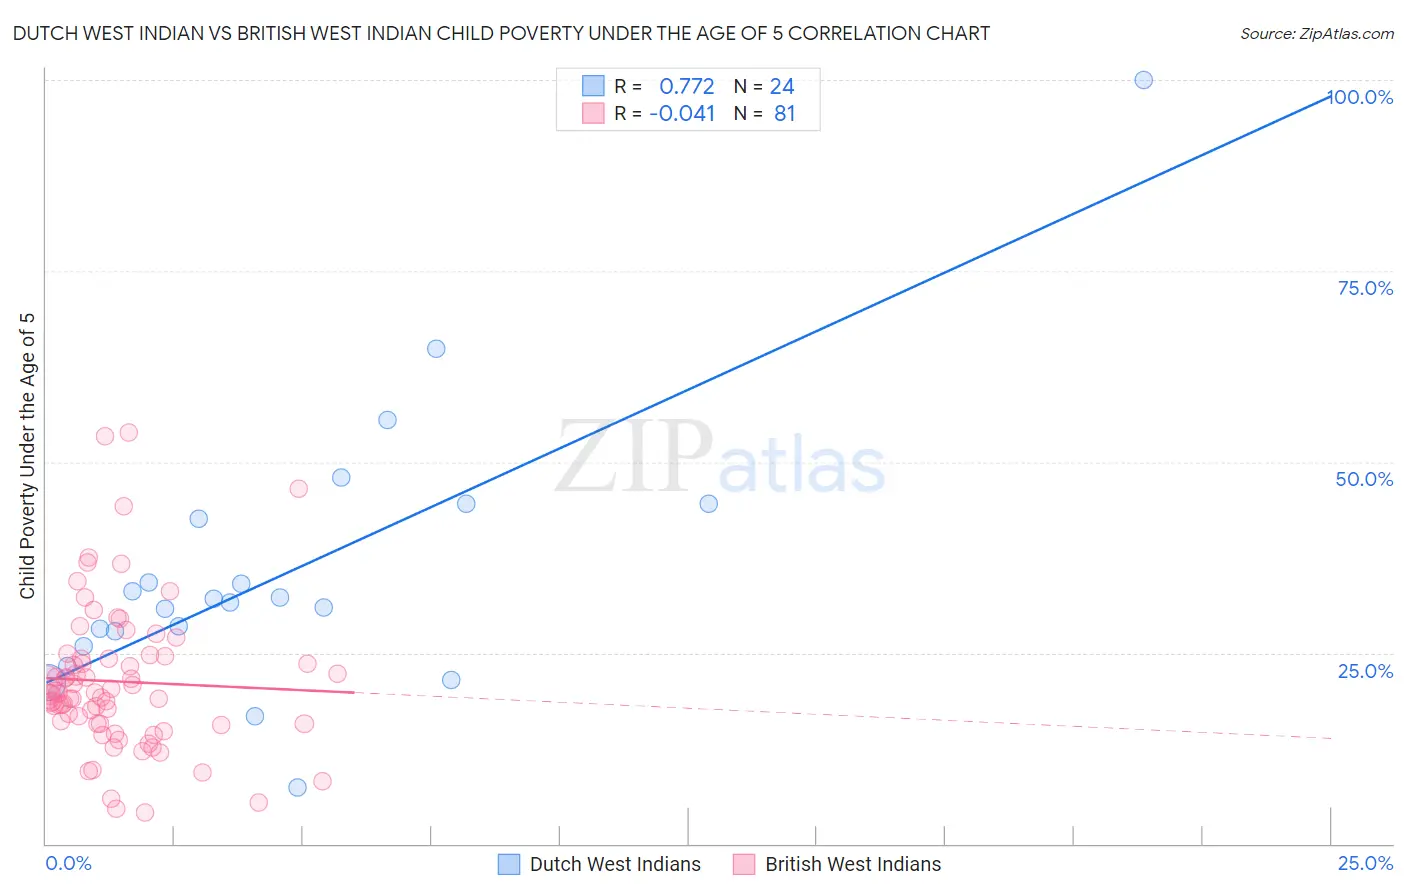 Dutch West Indian vs British West Indian Child Poverty Under the Age of 5